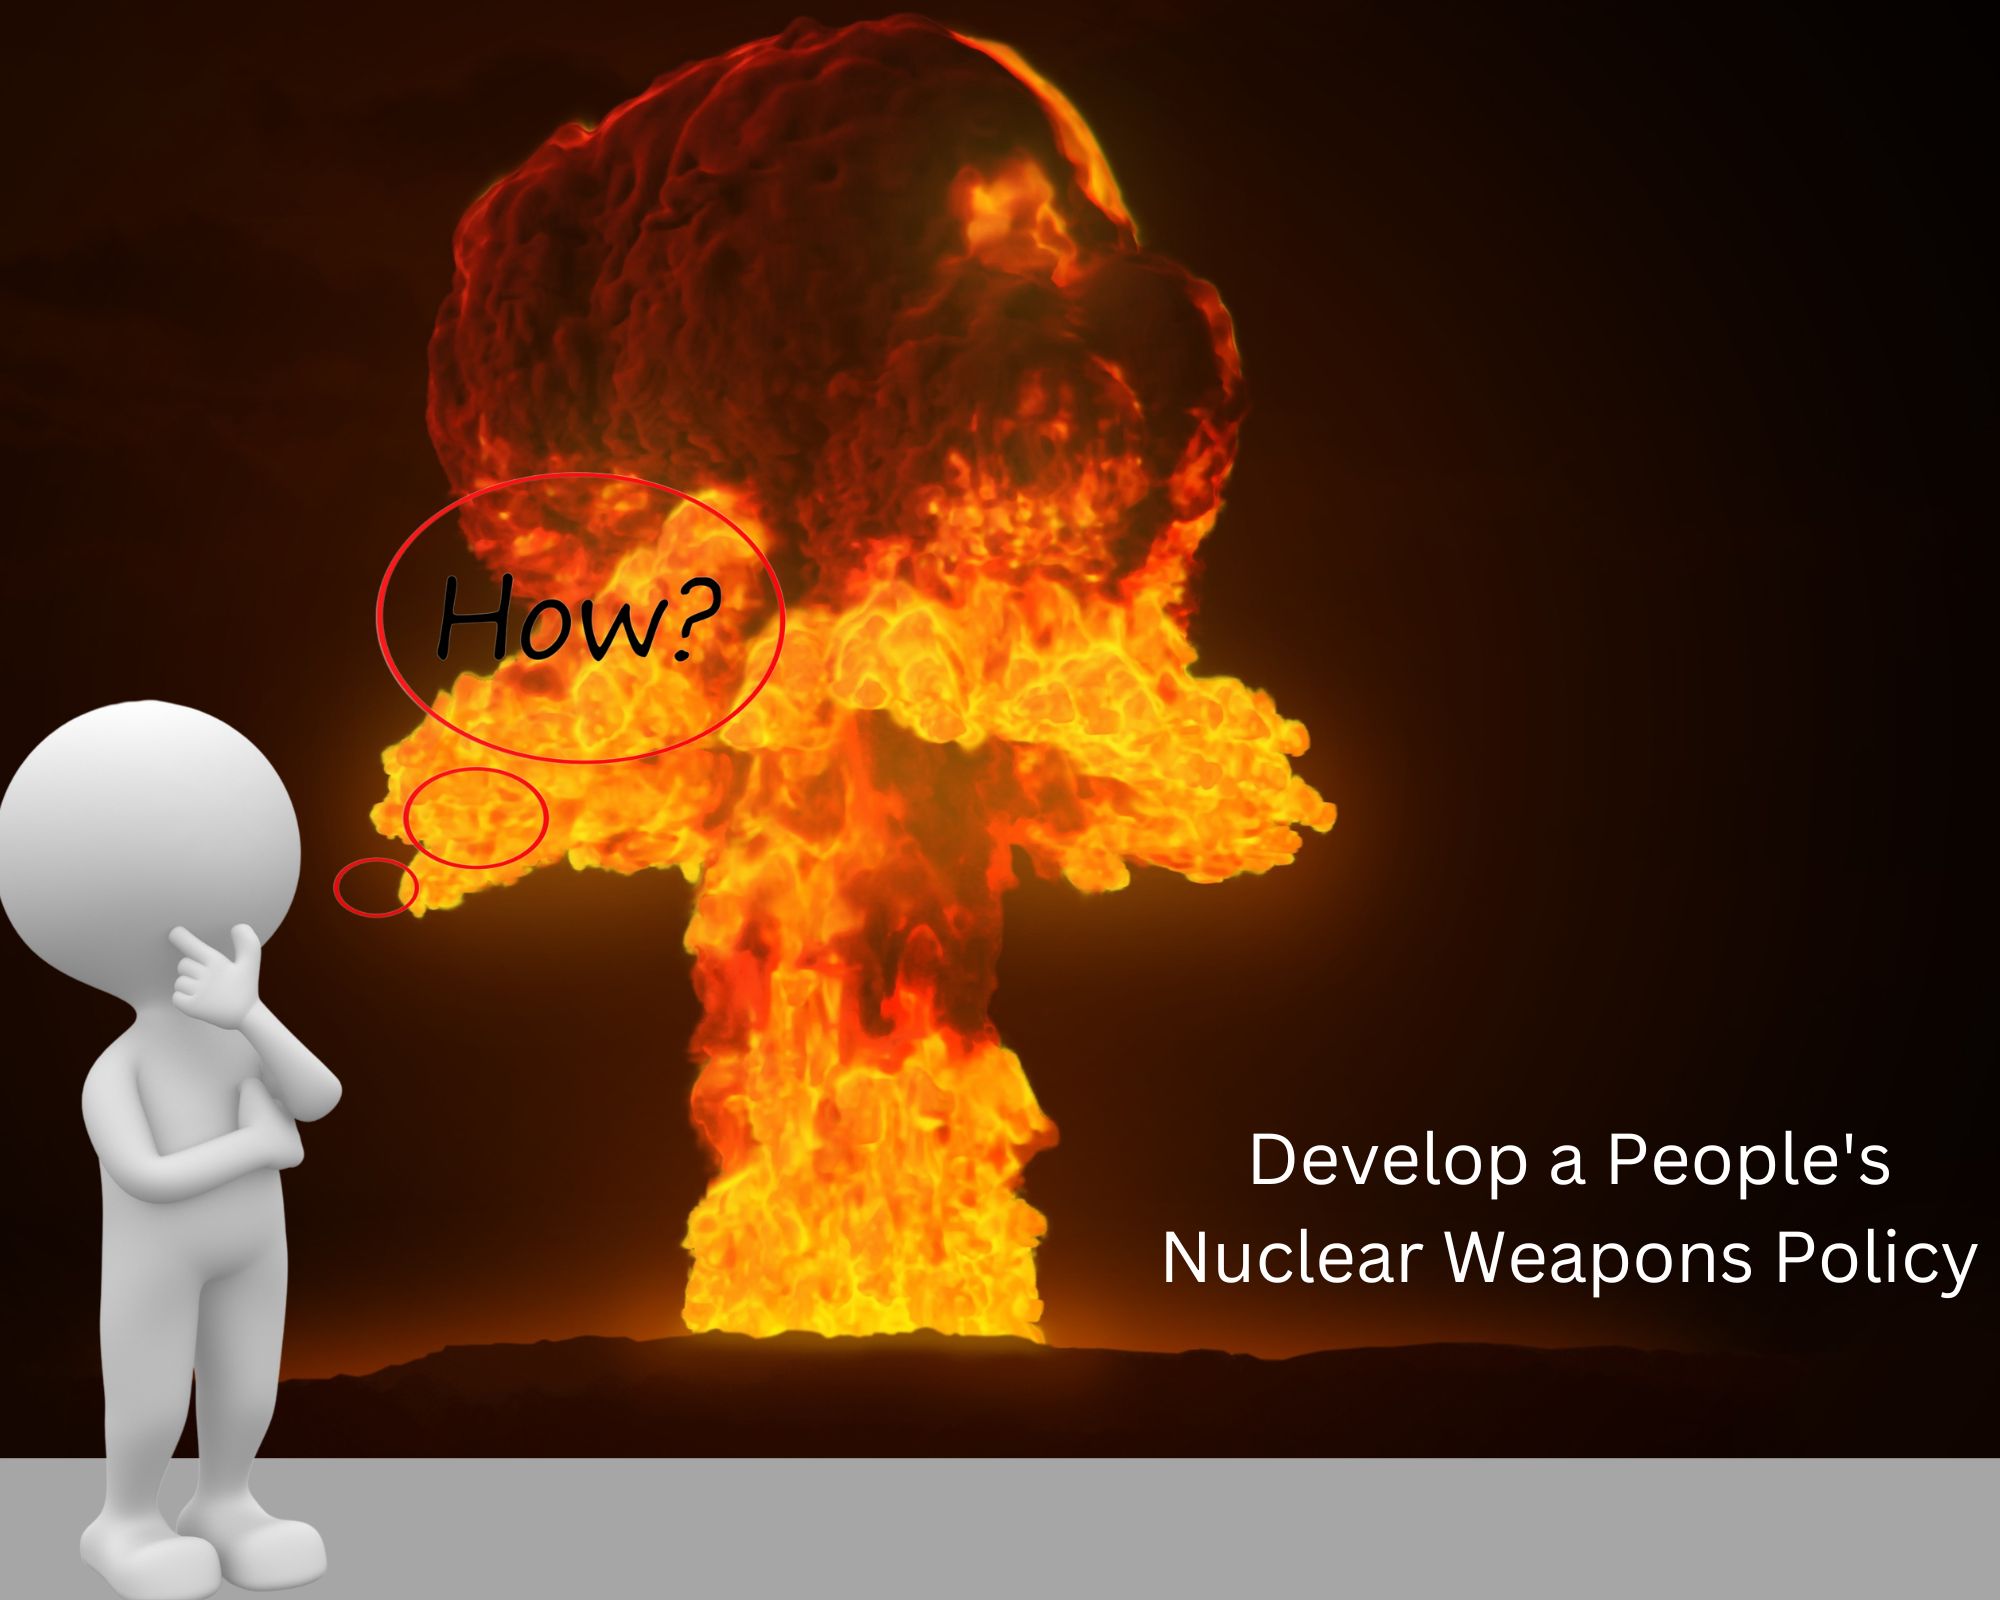 How to Develop a People's Nuclear Weapons Policy